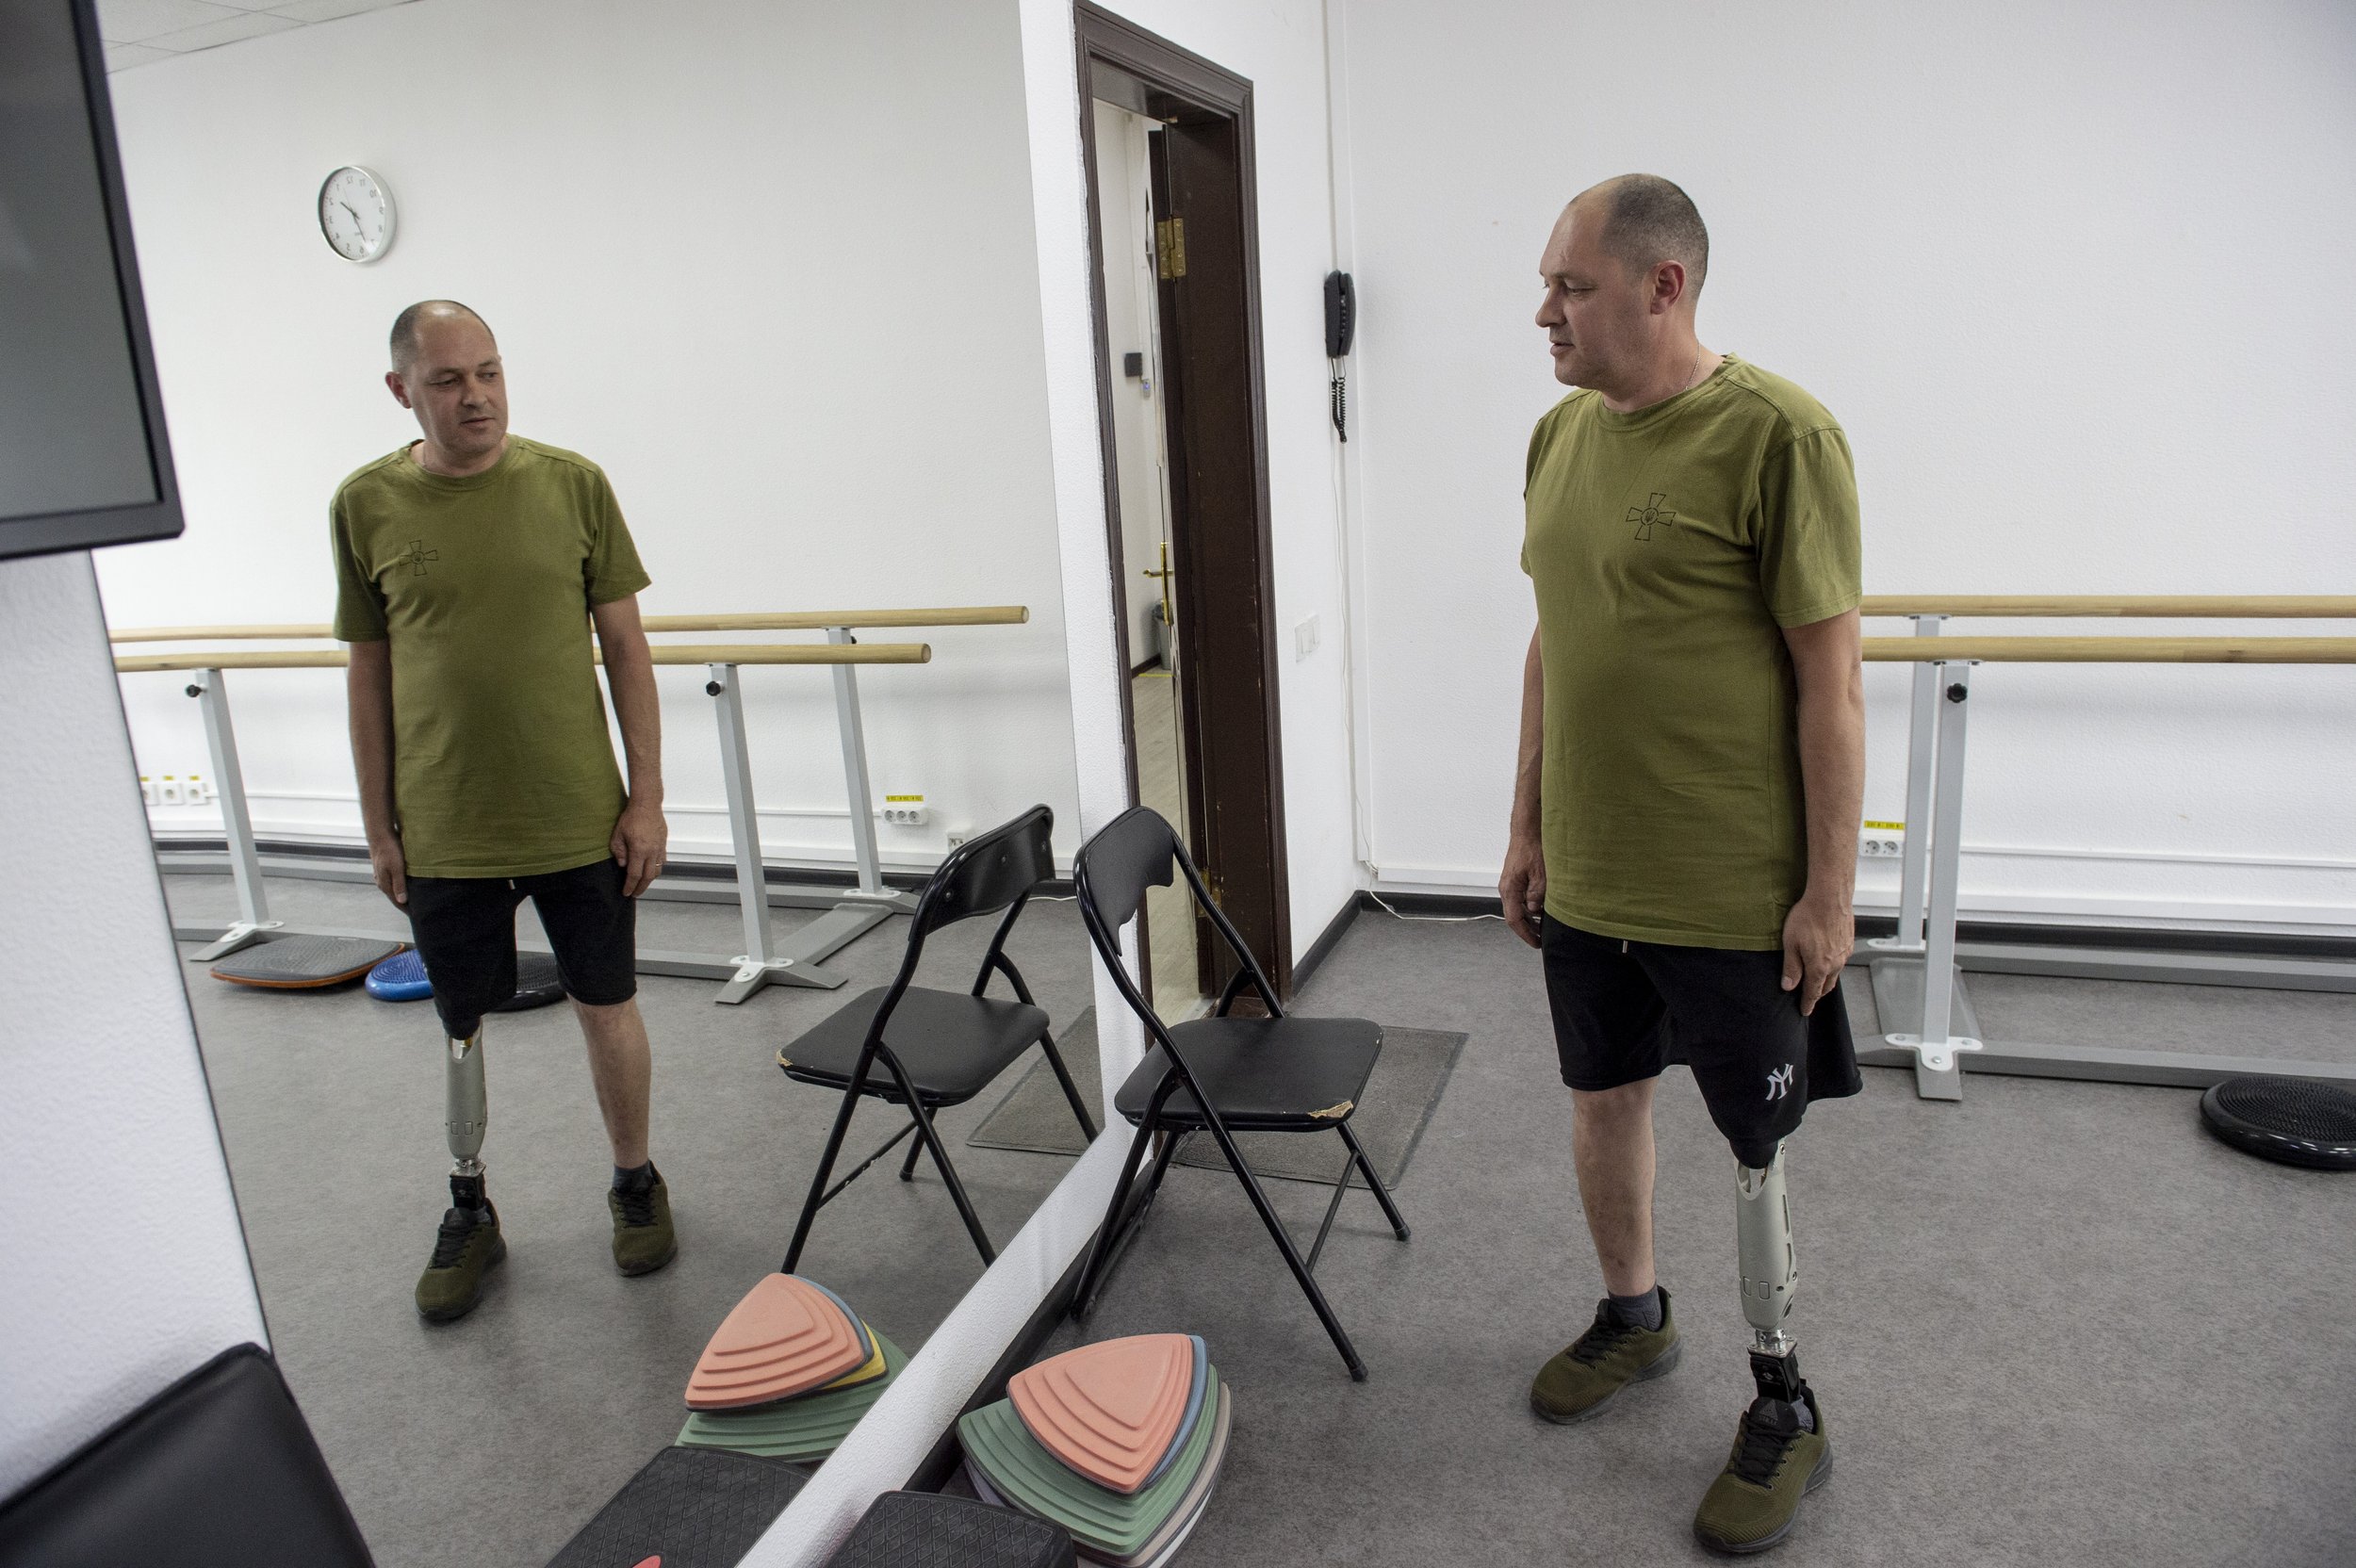  A soldier looks at himself in the mirror with his newly fitted prosthetic limb at the Without Limits Clinic in Kyiv, Ukraine on June 20, 2023. Experts are still collecting data on how soldiers returning from the frontlines of the war will adapt to s